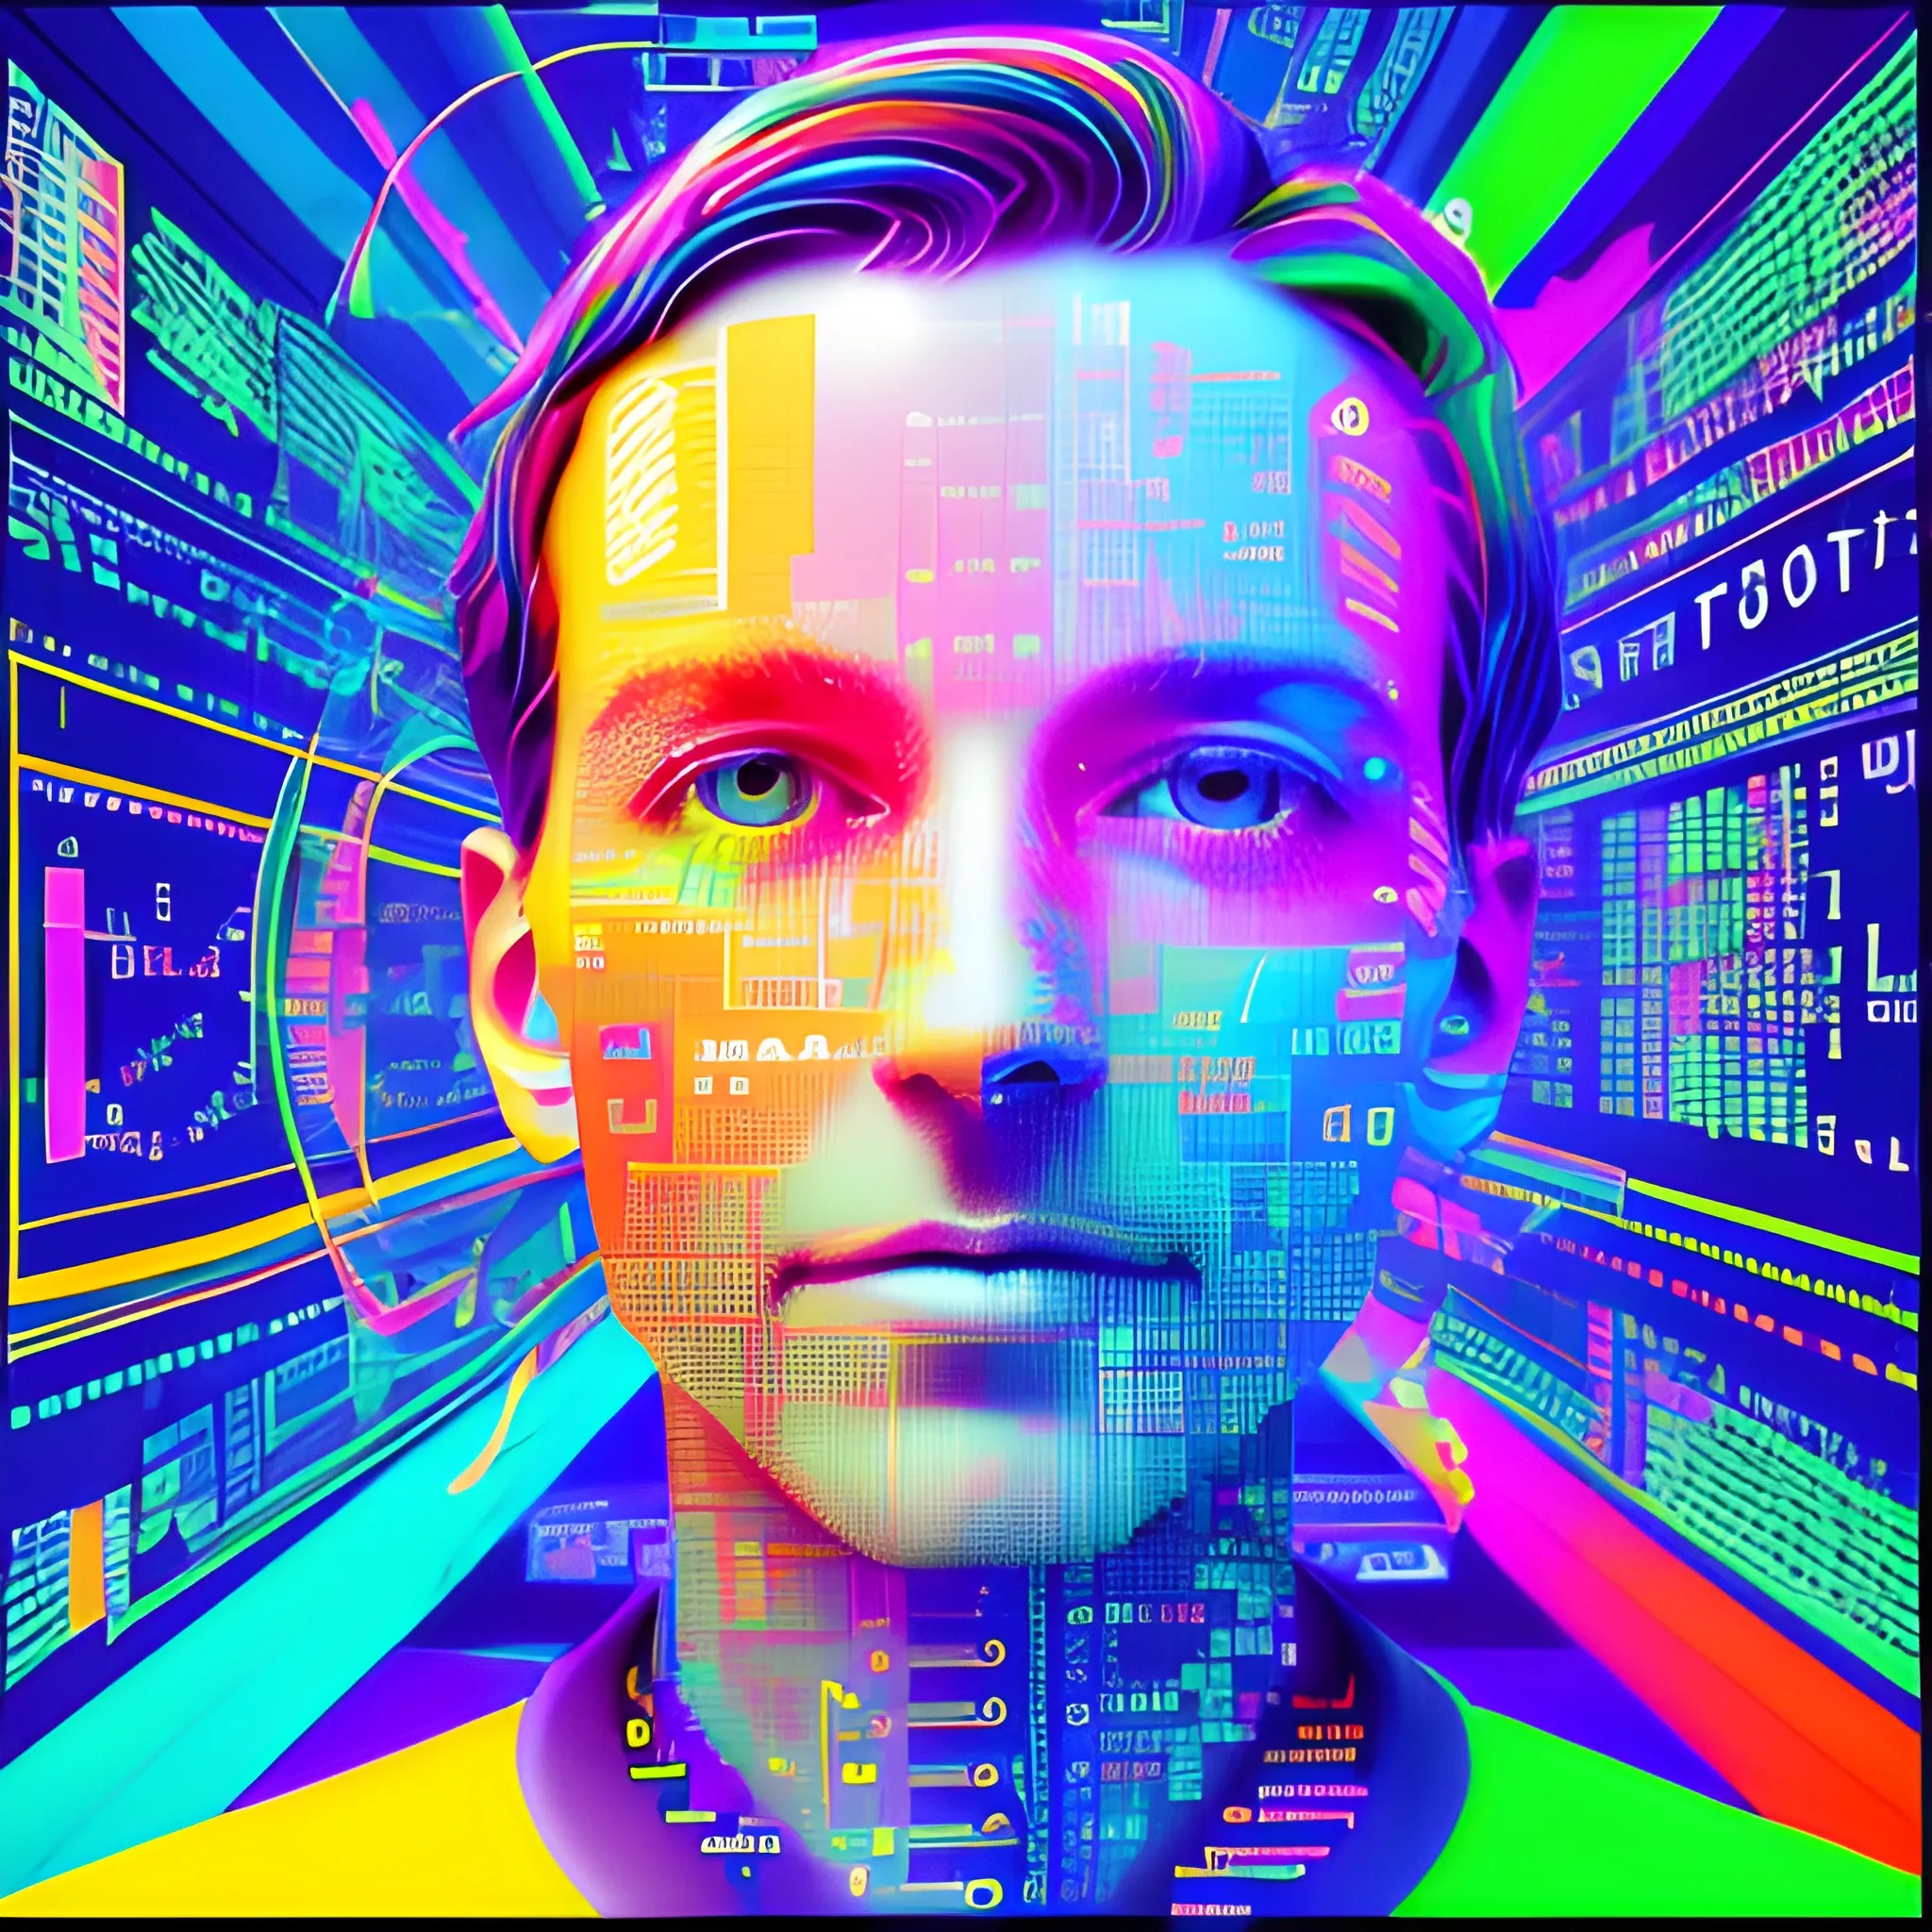 generate a corporative, future, colorful, modern image with big data, Trippy, related to digital products.